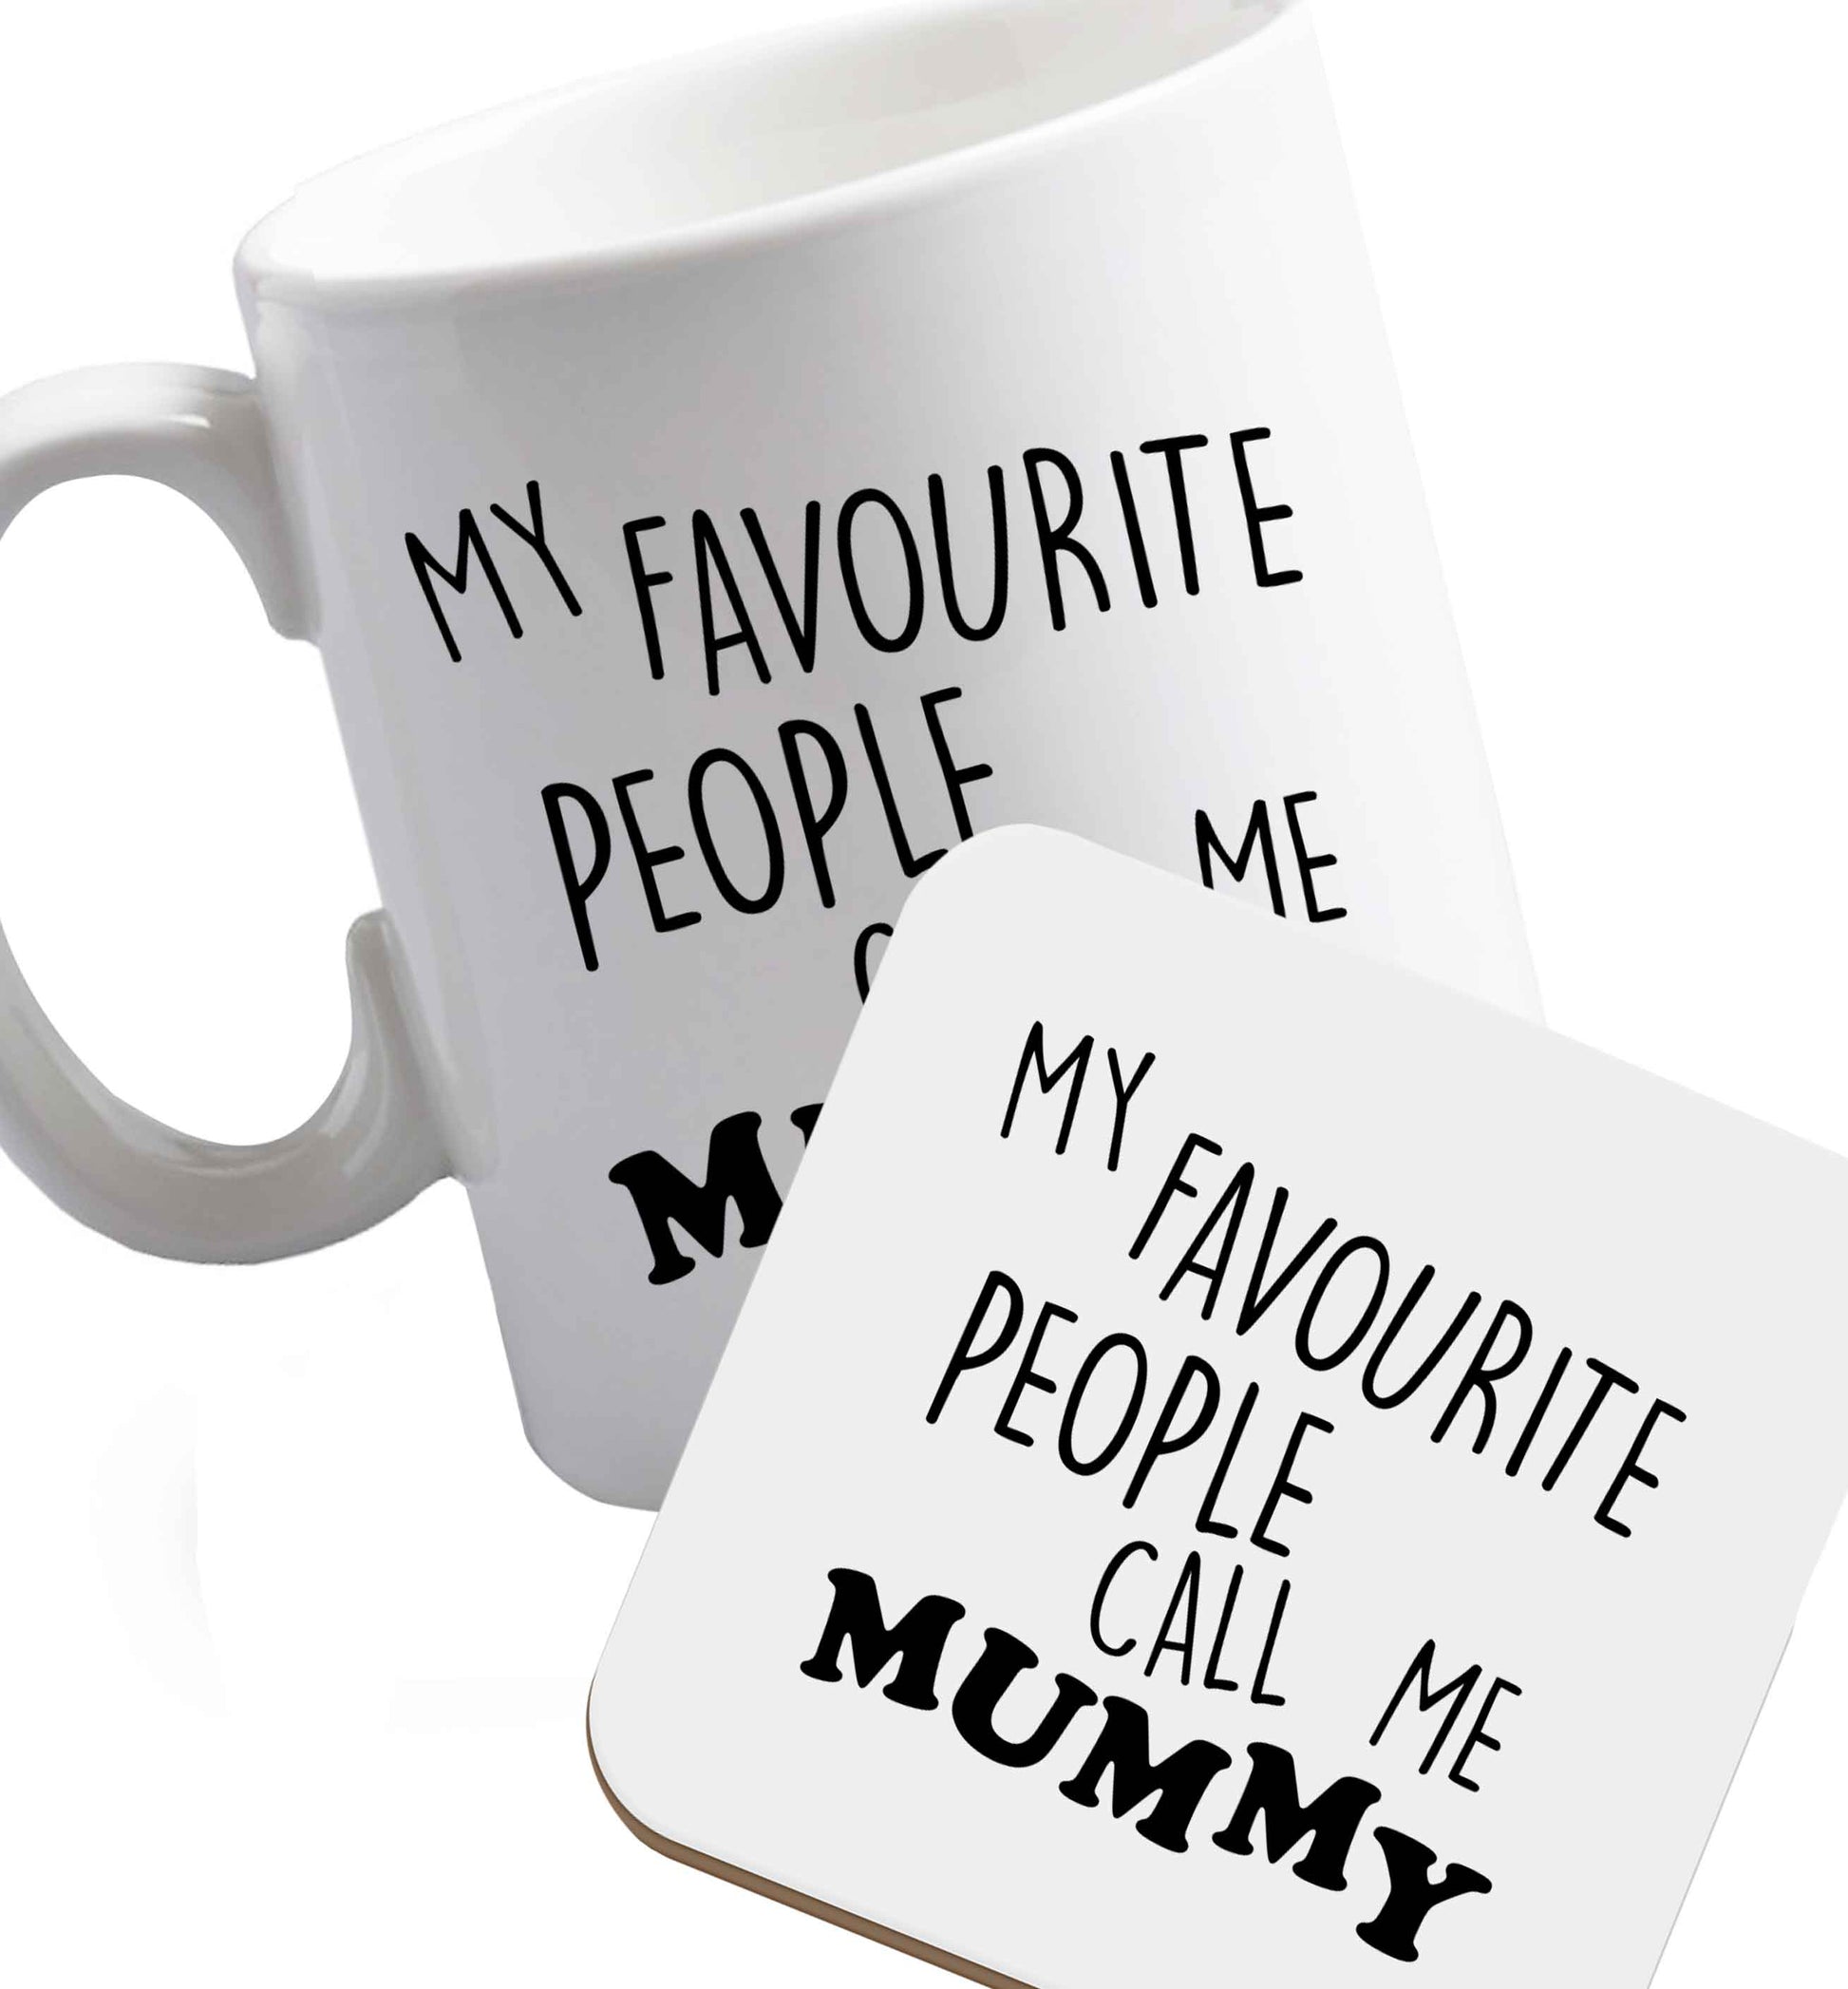 10 oz My favourite people call me mummy ceramic mug and coaster set right handed